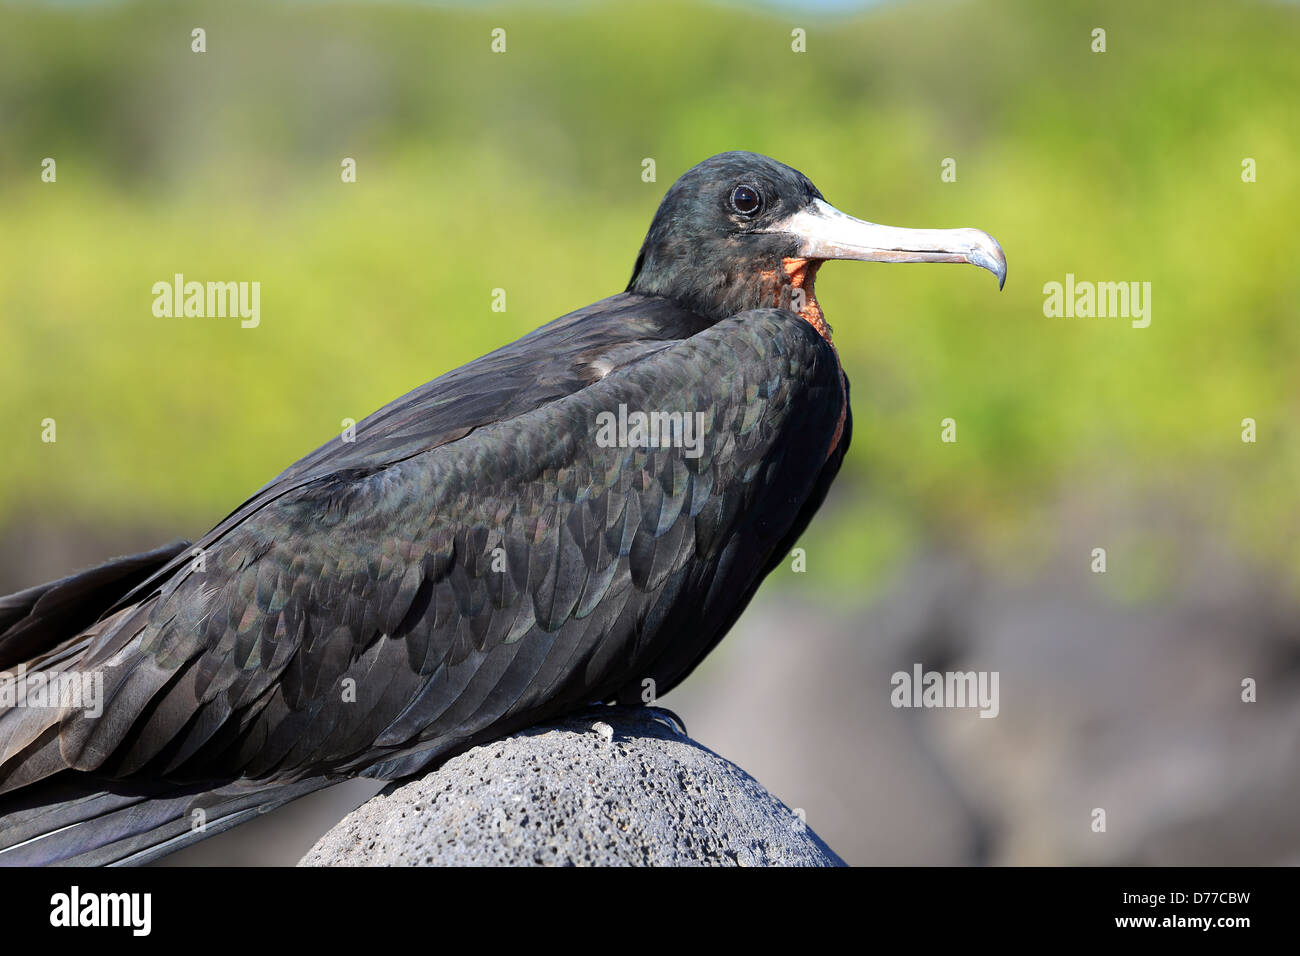 Magnificent frigate bird resting on volcanic rock, Galapagos Islands Stock Photo